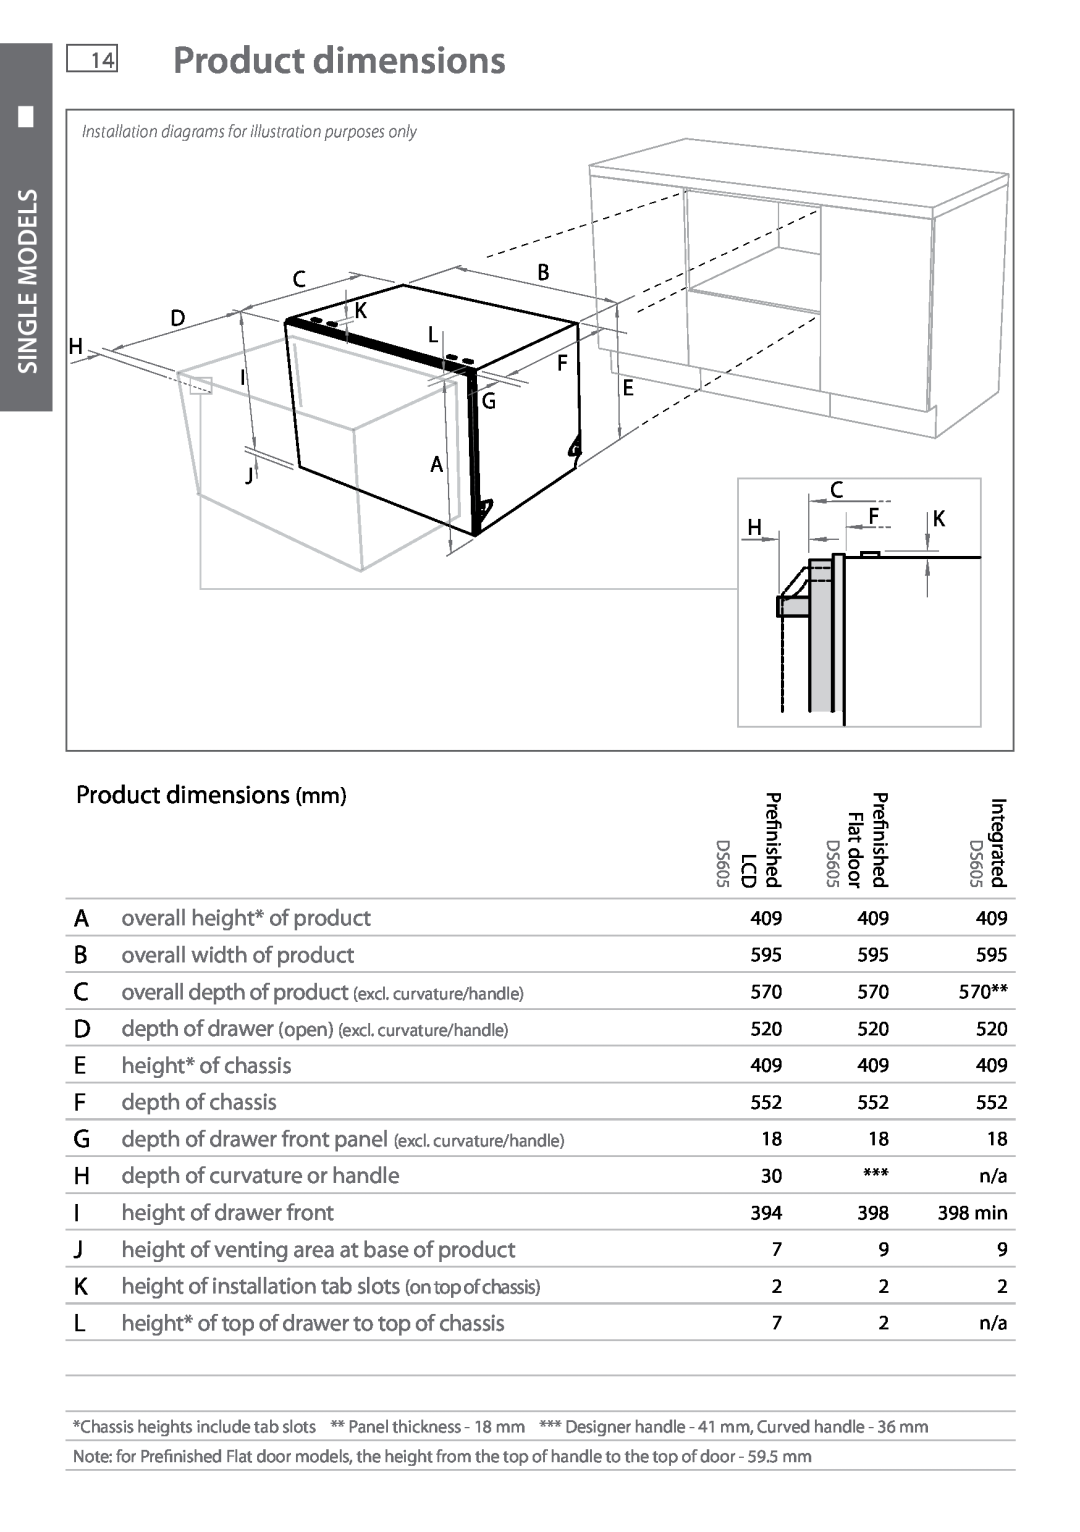 Fisher & Paykel DD605 installation instructions 14Product dimensions, Single Models 